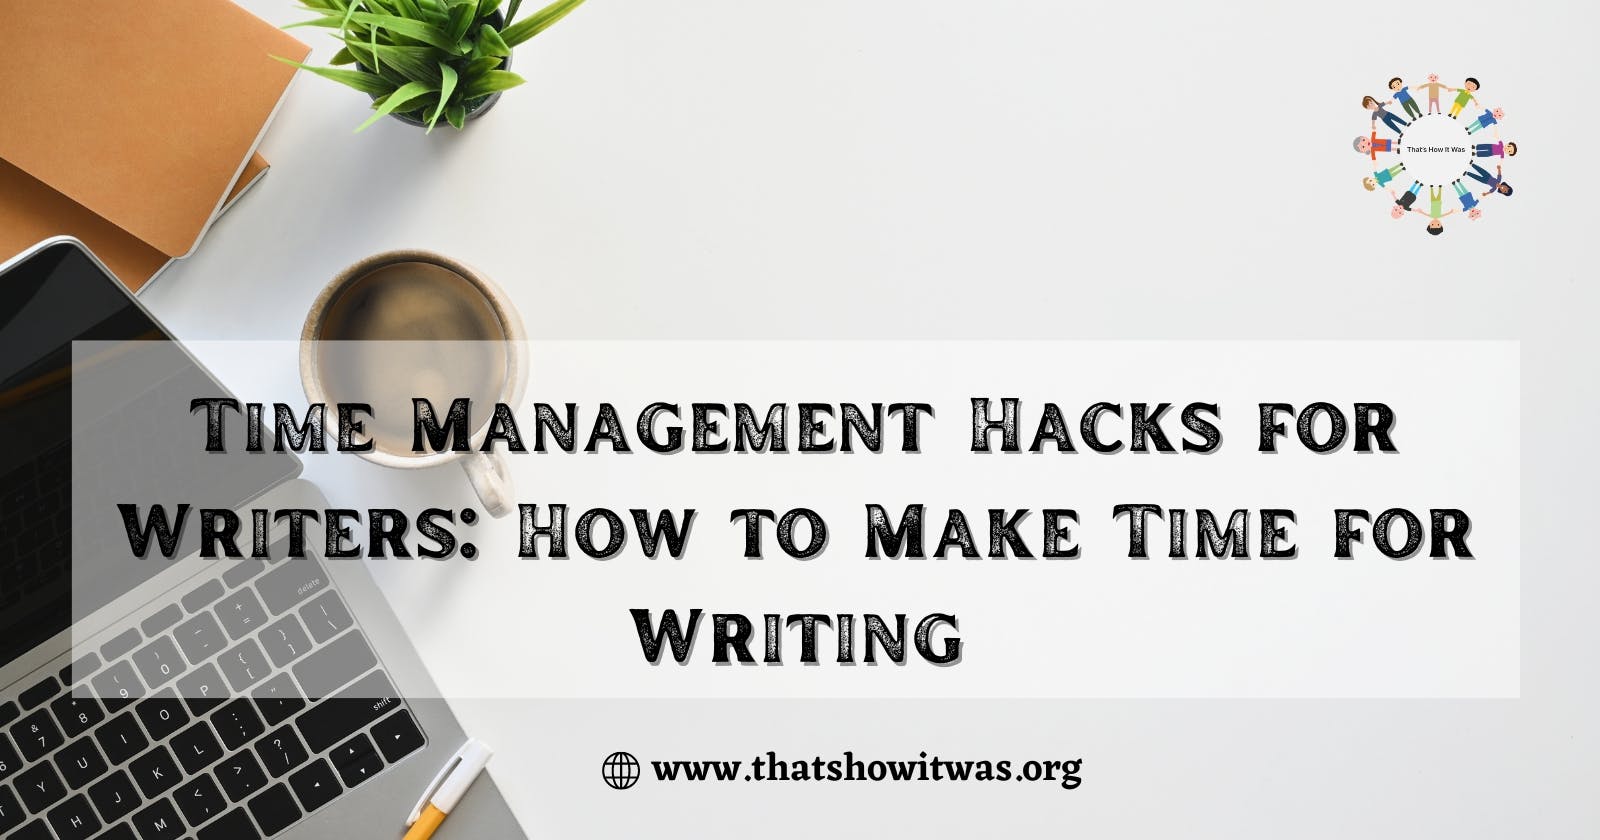 Time Management Hacks for Writers: How to Make Time for Writing